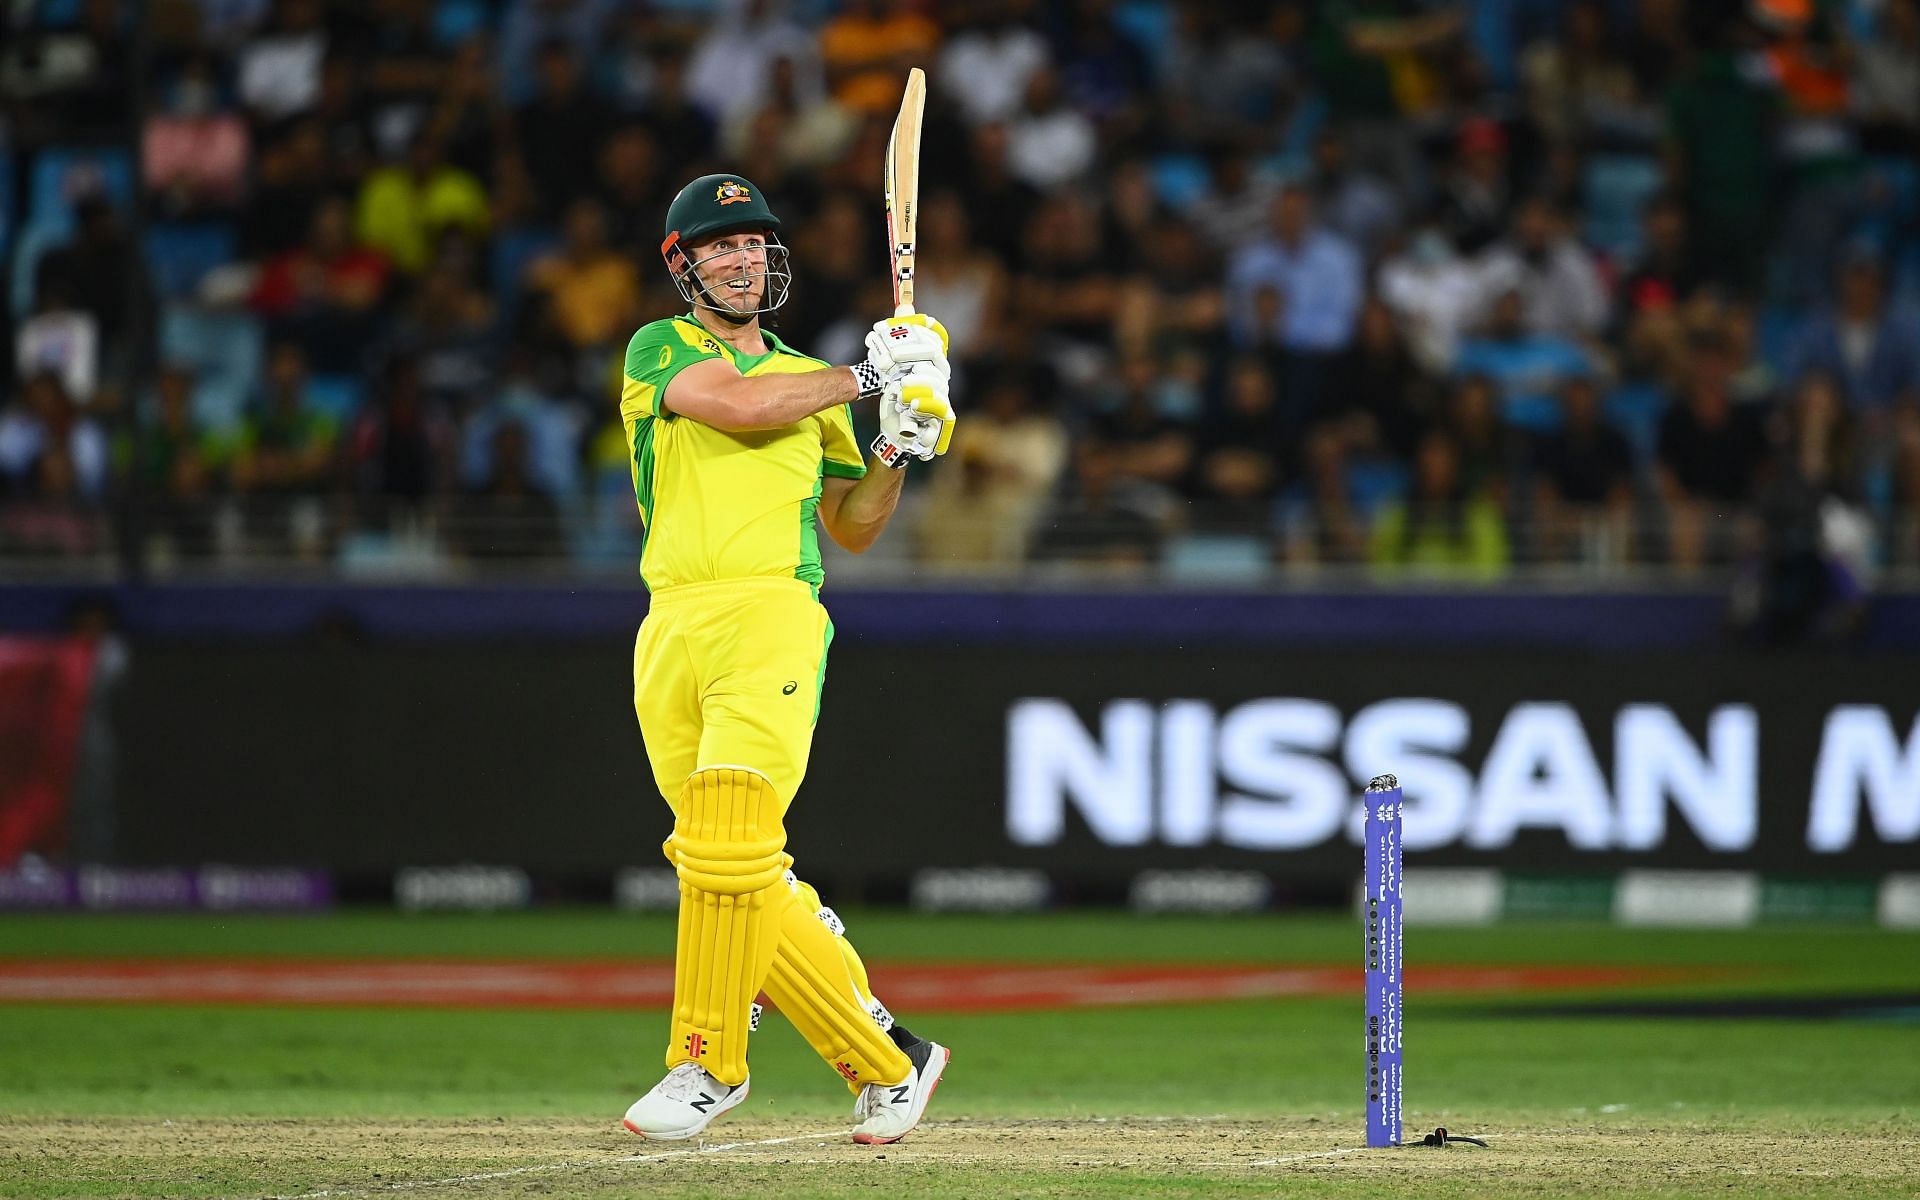 Mitchell Marsh was at his best against New Zealand